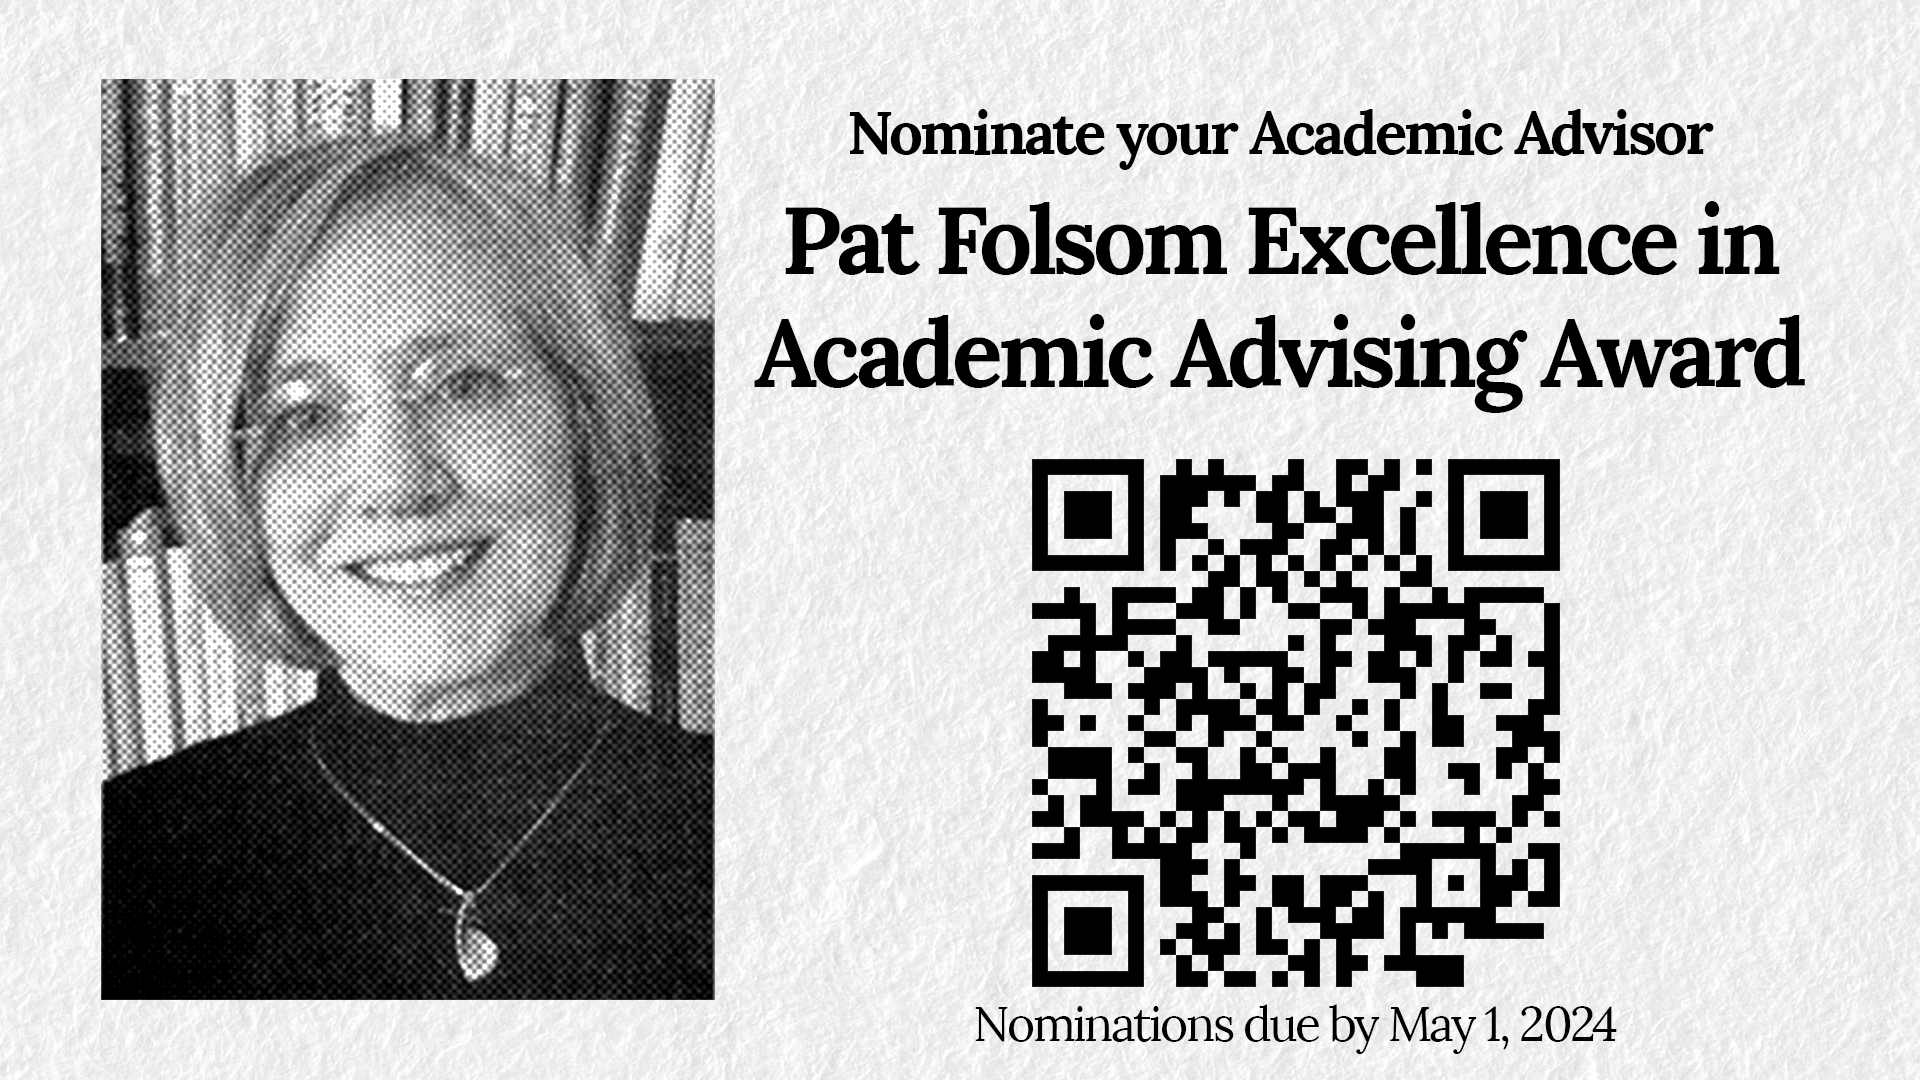 Pat Folsom Excellence in Academic Advising Award